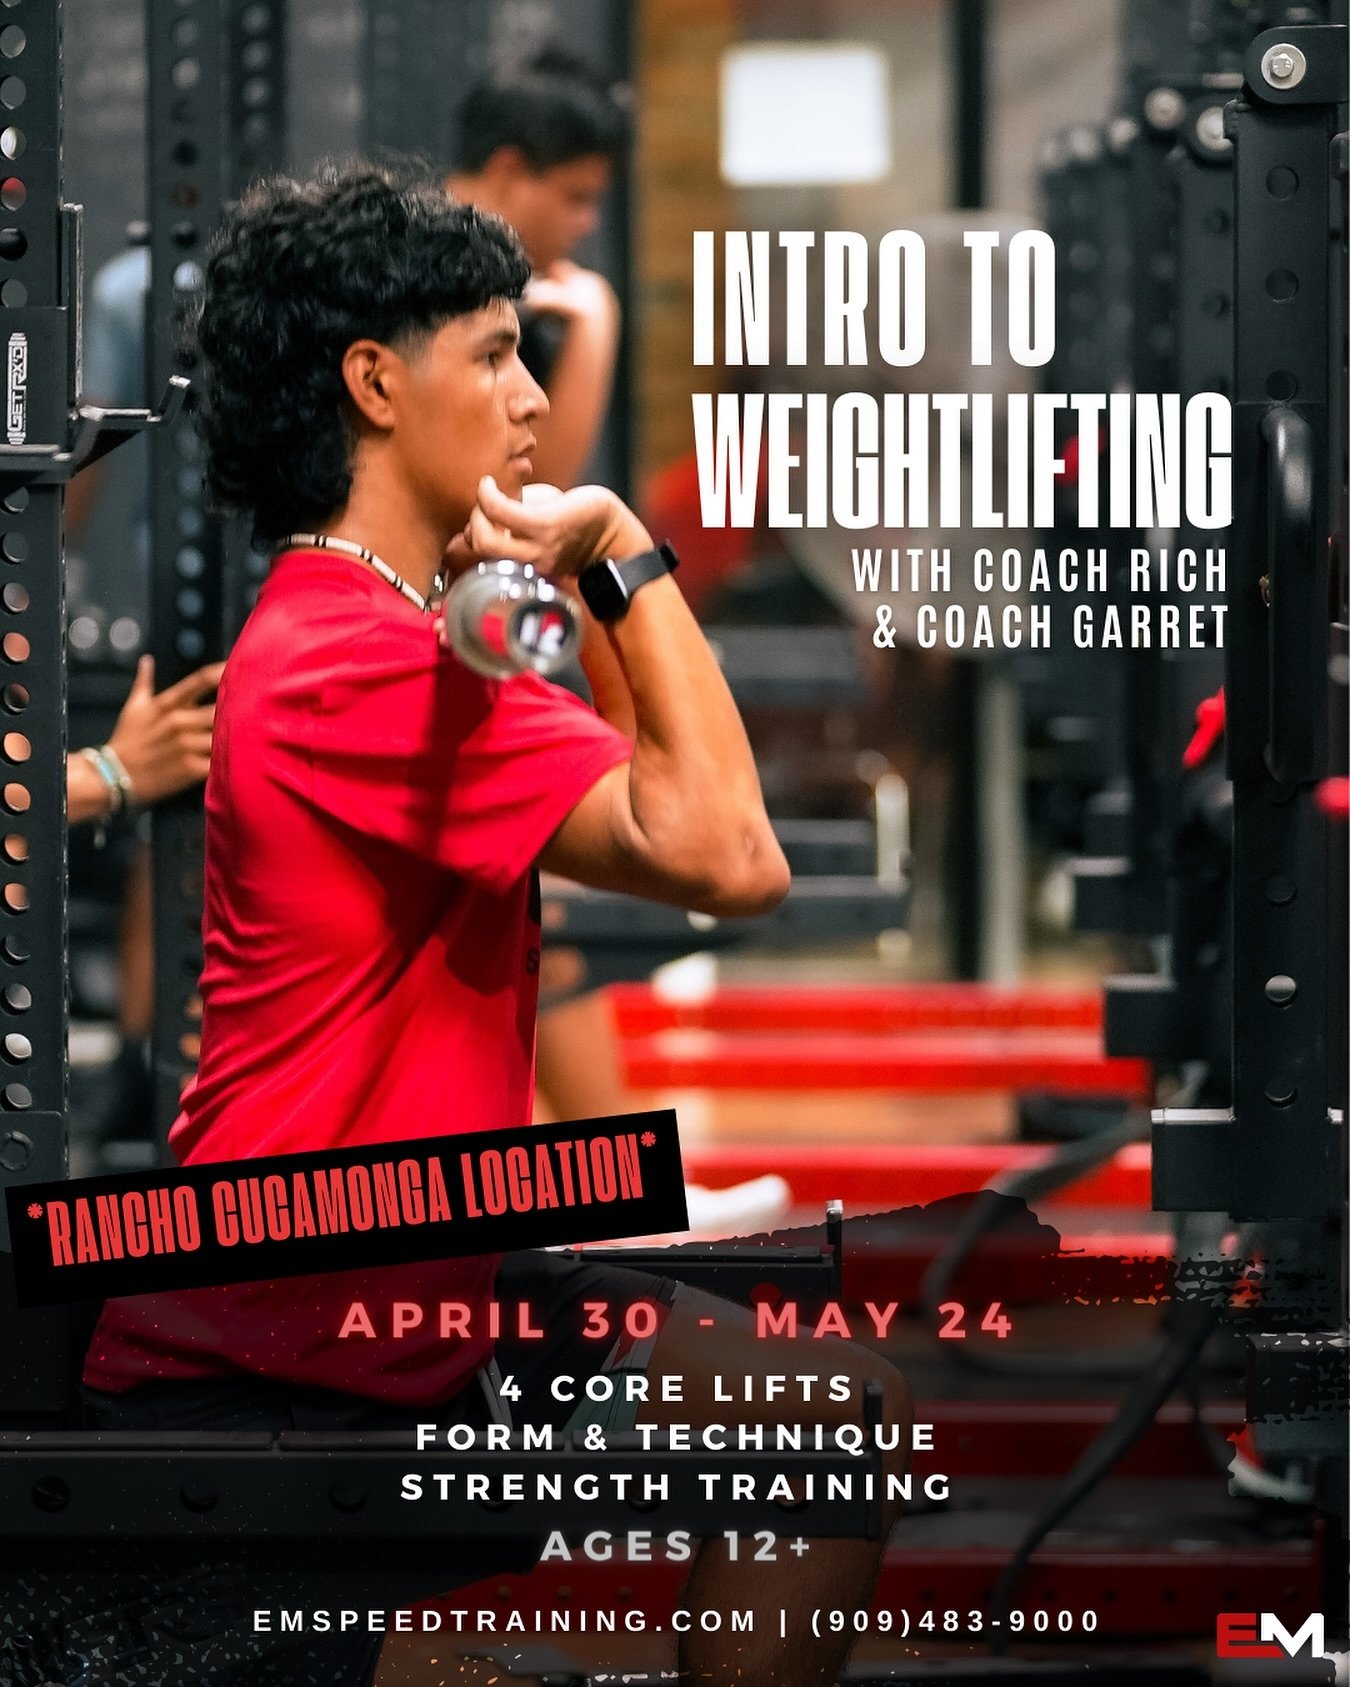 Secure your spot TODAY‼️Intro to Weightlifting with Coach Rich &amp; Coach Garret🦾 Experience 4 Core Lifts, Form &amp; Techniques, and Strength Training in our well-equipped facility with state-of-the-art equipment.⁠
⁠
▪️April 30 - May 24⁠
▪️Must be